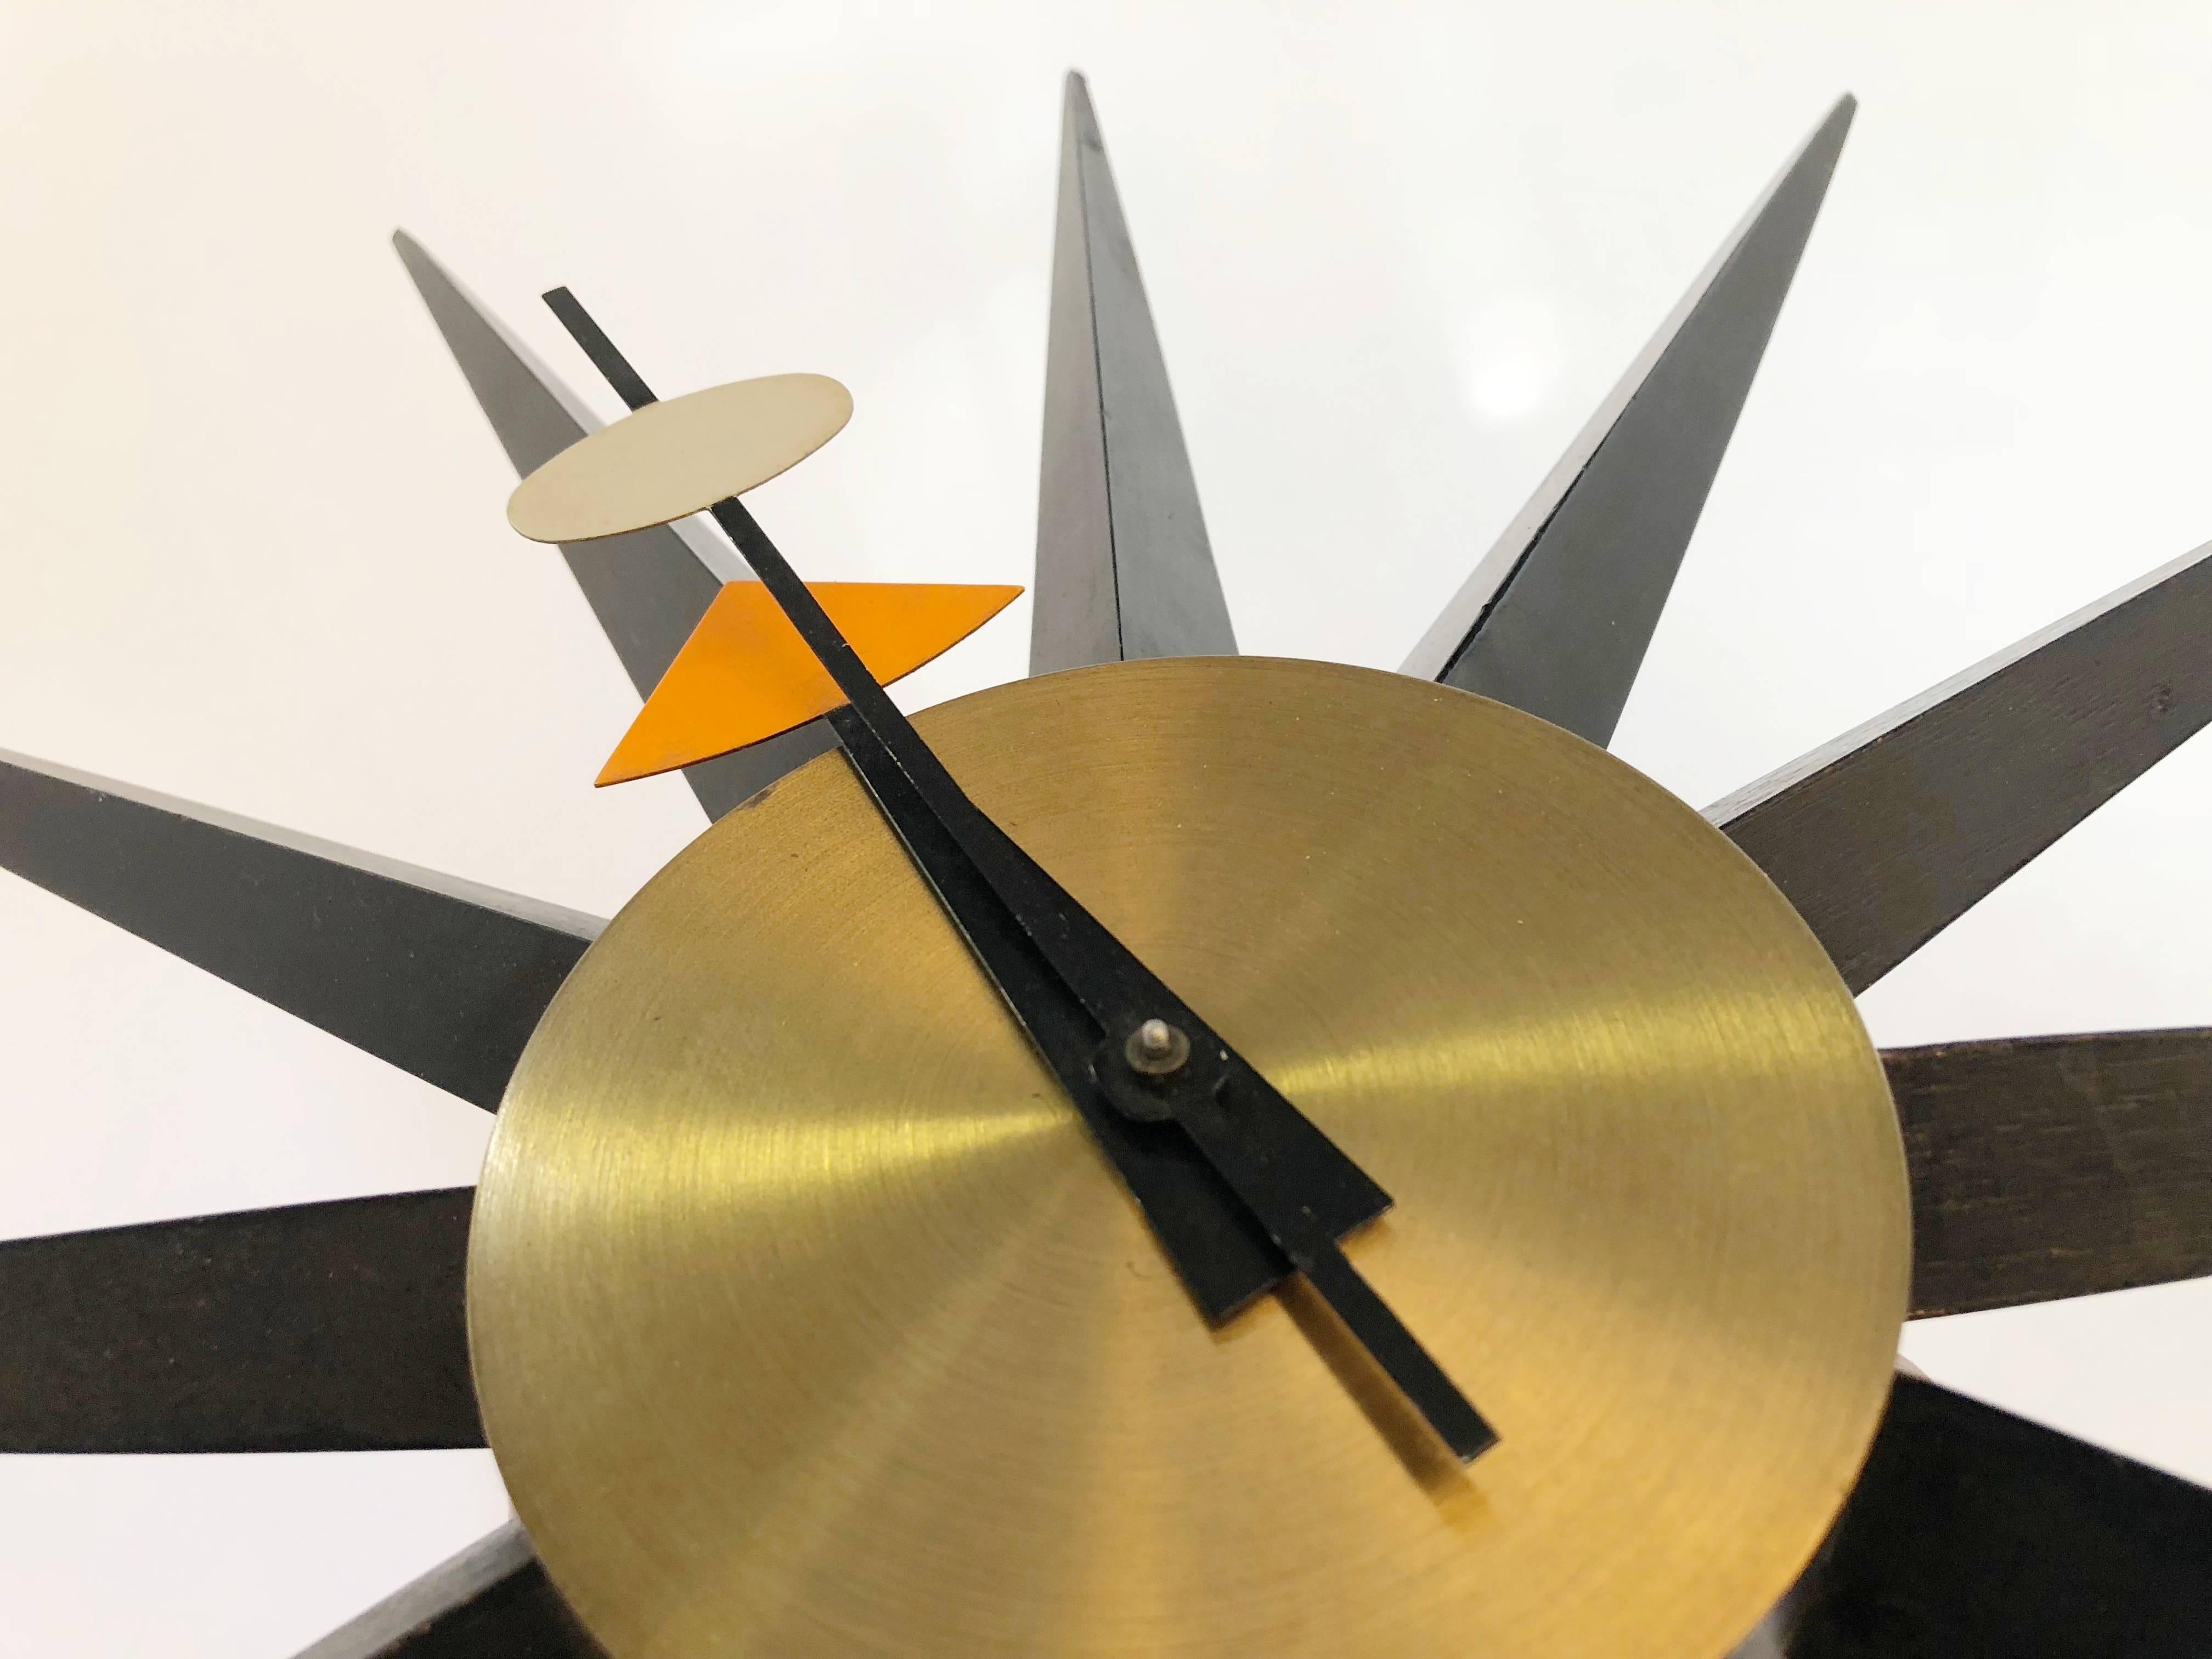 Wonderful spike Starburst clock by George Nelson for Howard Miller. Featuring black sunbeams with a brass colored clock face. The Howard Miller manufacturing label can be found on the back. 

The archetypal design makes this clock appropriate for a